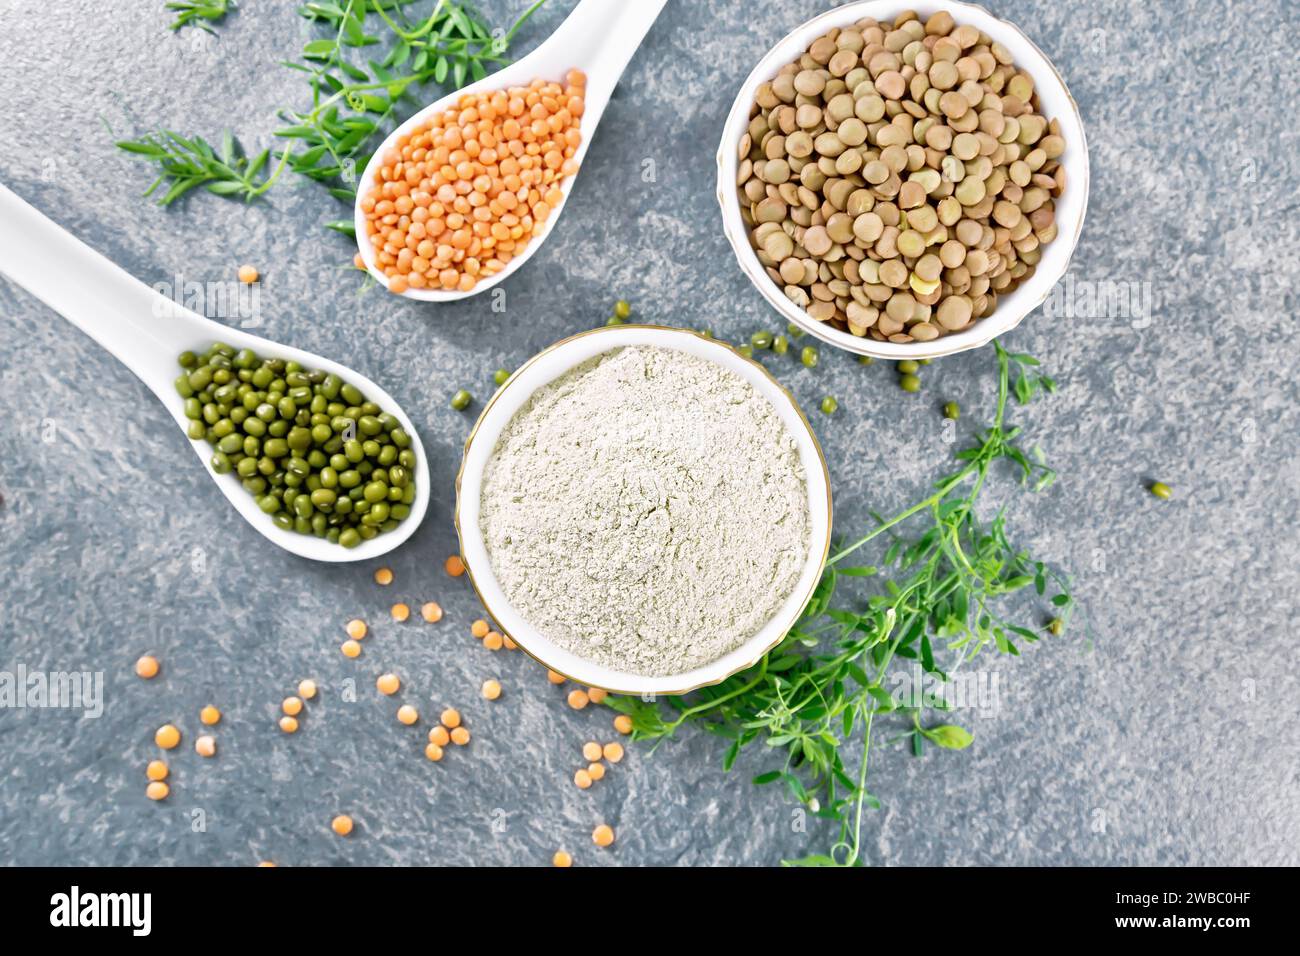 Lentil flour in a bowl, red, green lentils in spoons, brown in a bowl, bean stalks with leaves on the background of granite table from above Stock Photo